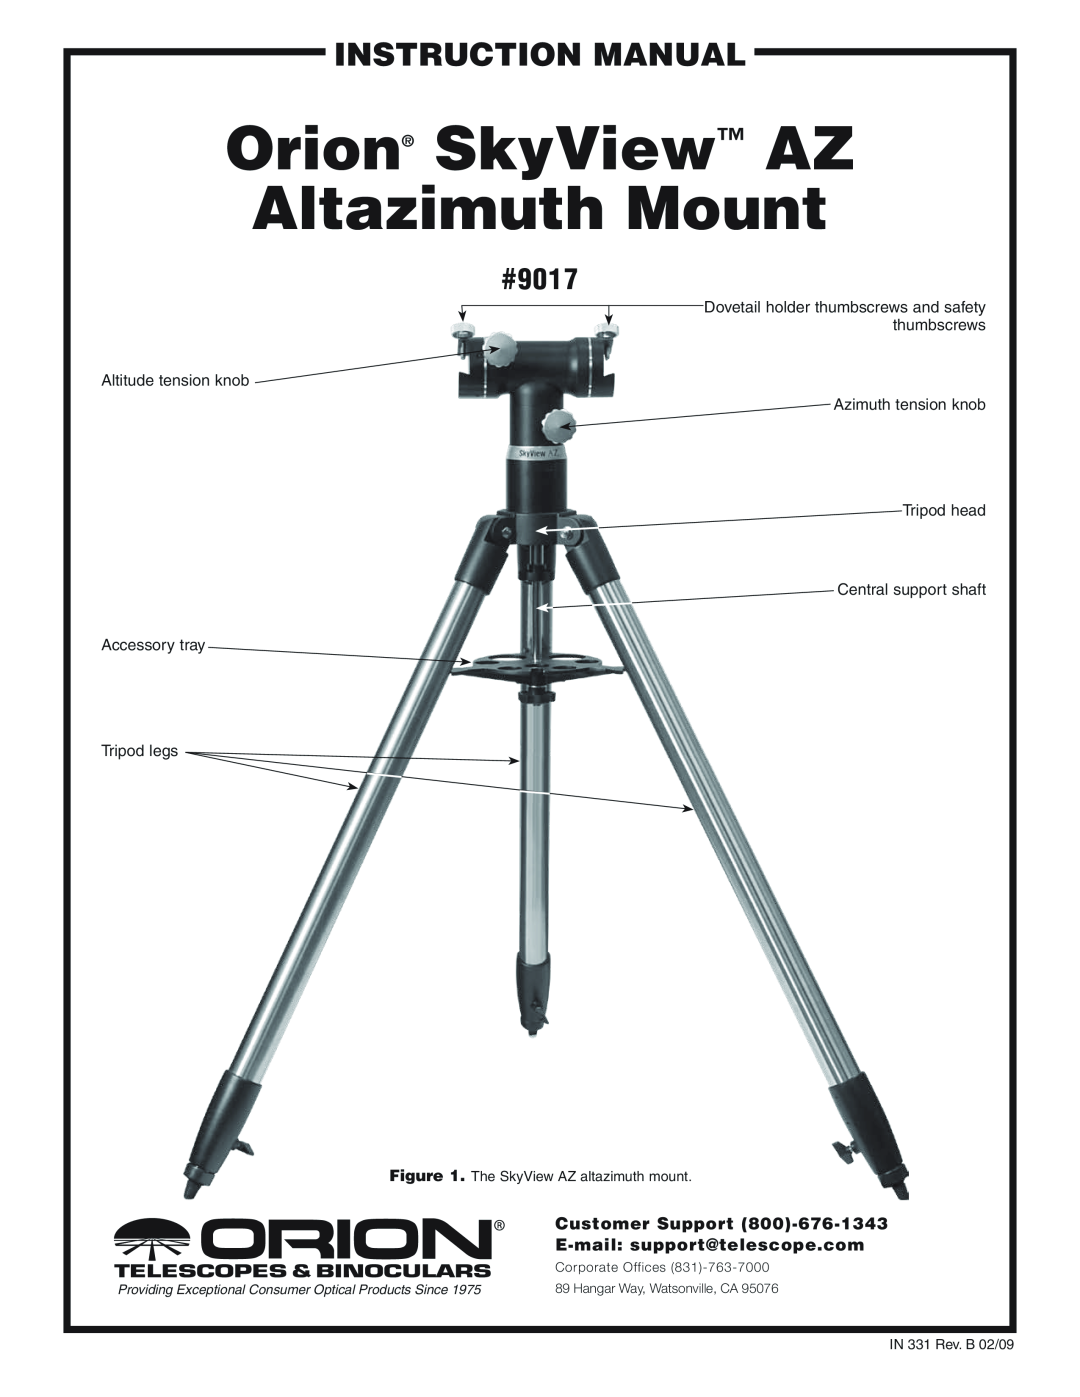 Orion instruction manual #9017, Orion SkyView AZ Altazimuth Mount, instruction Manual, Customer Support 800 ‑676-1343 